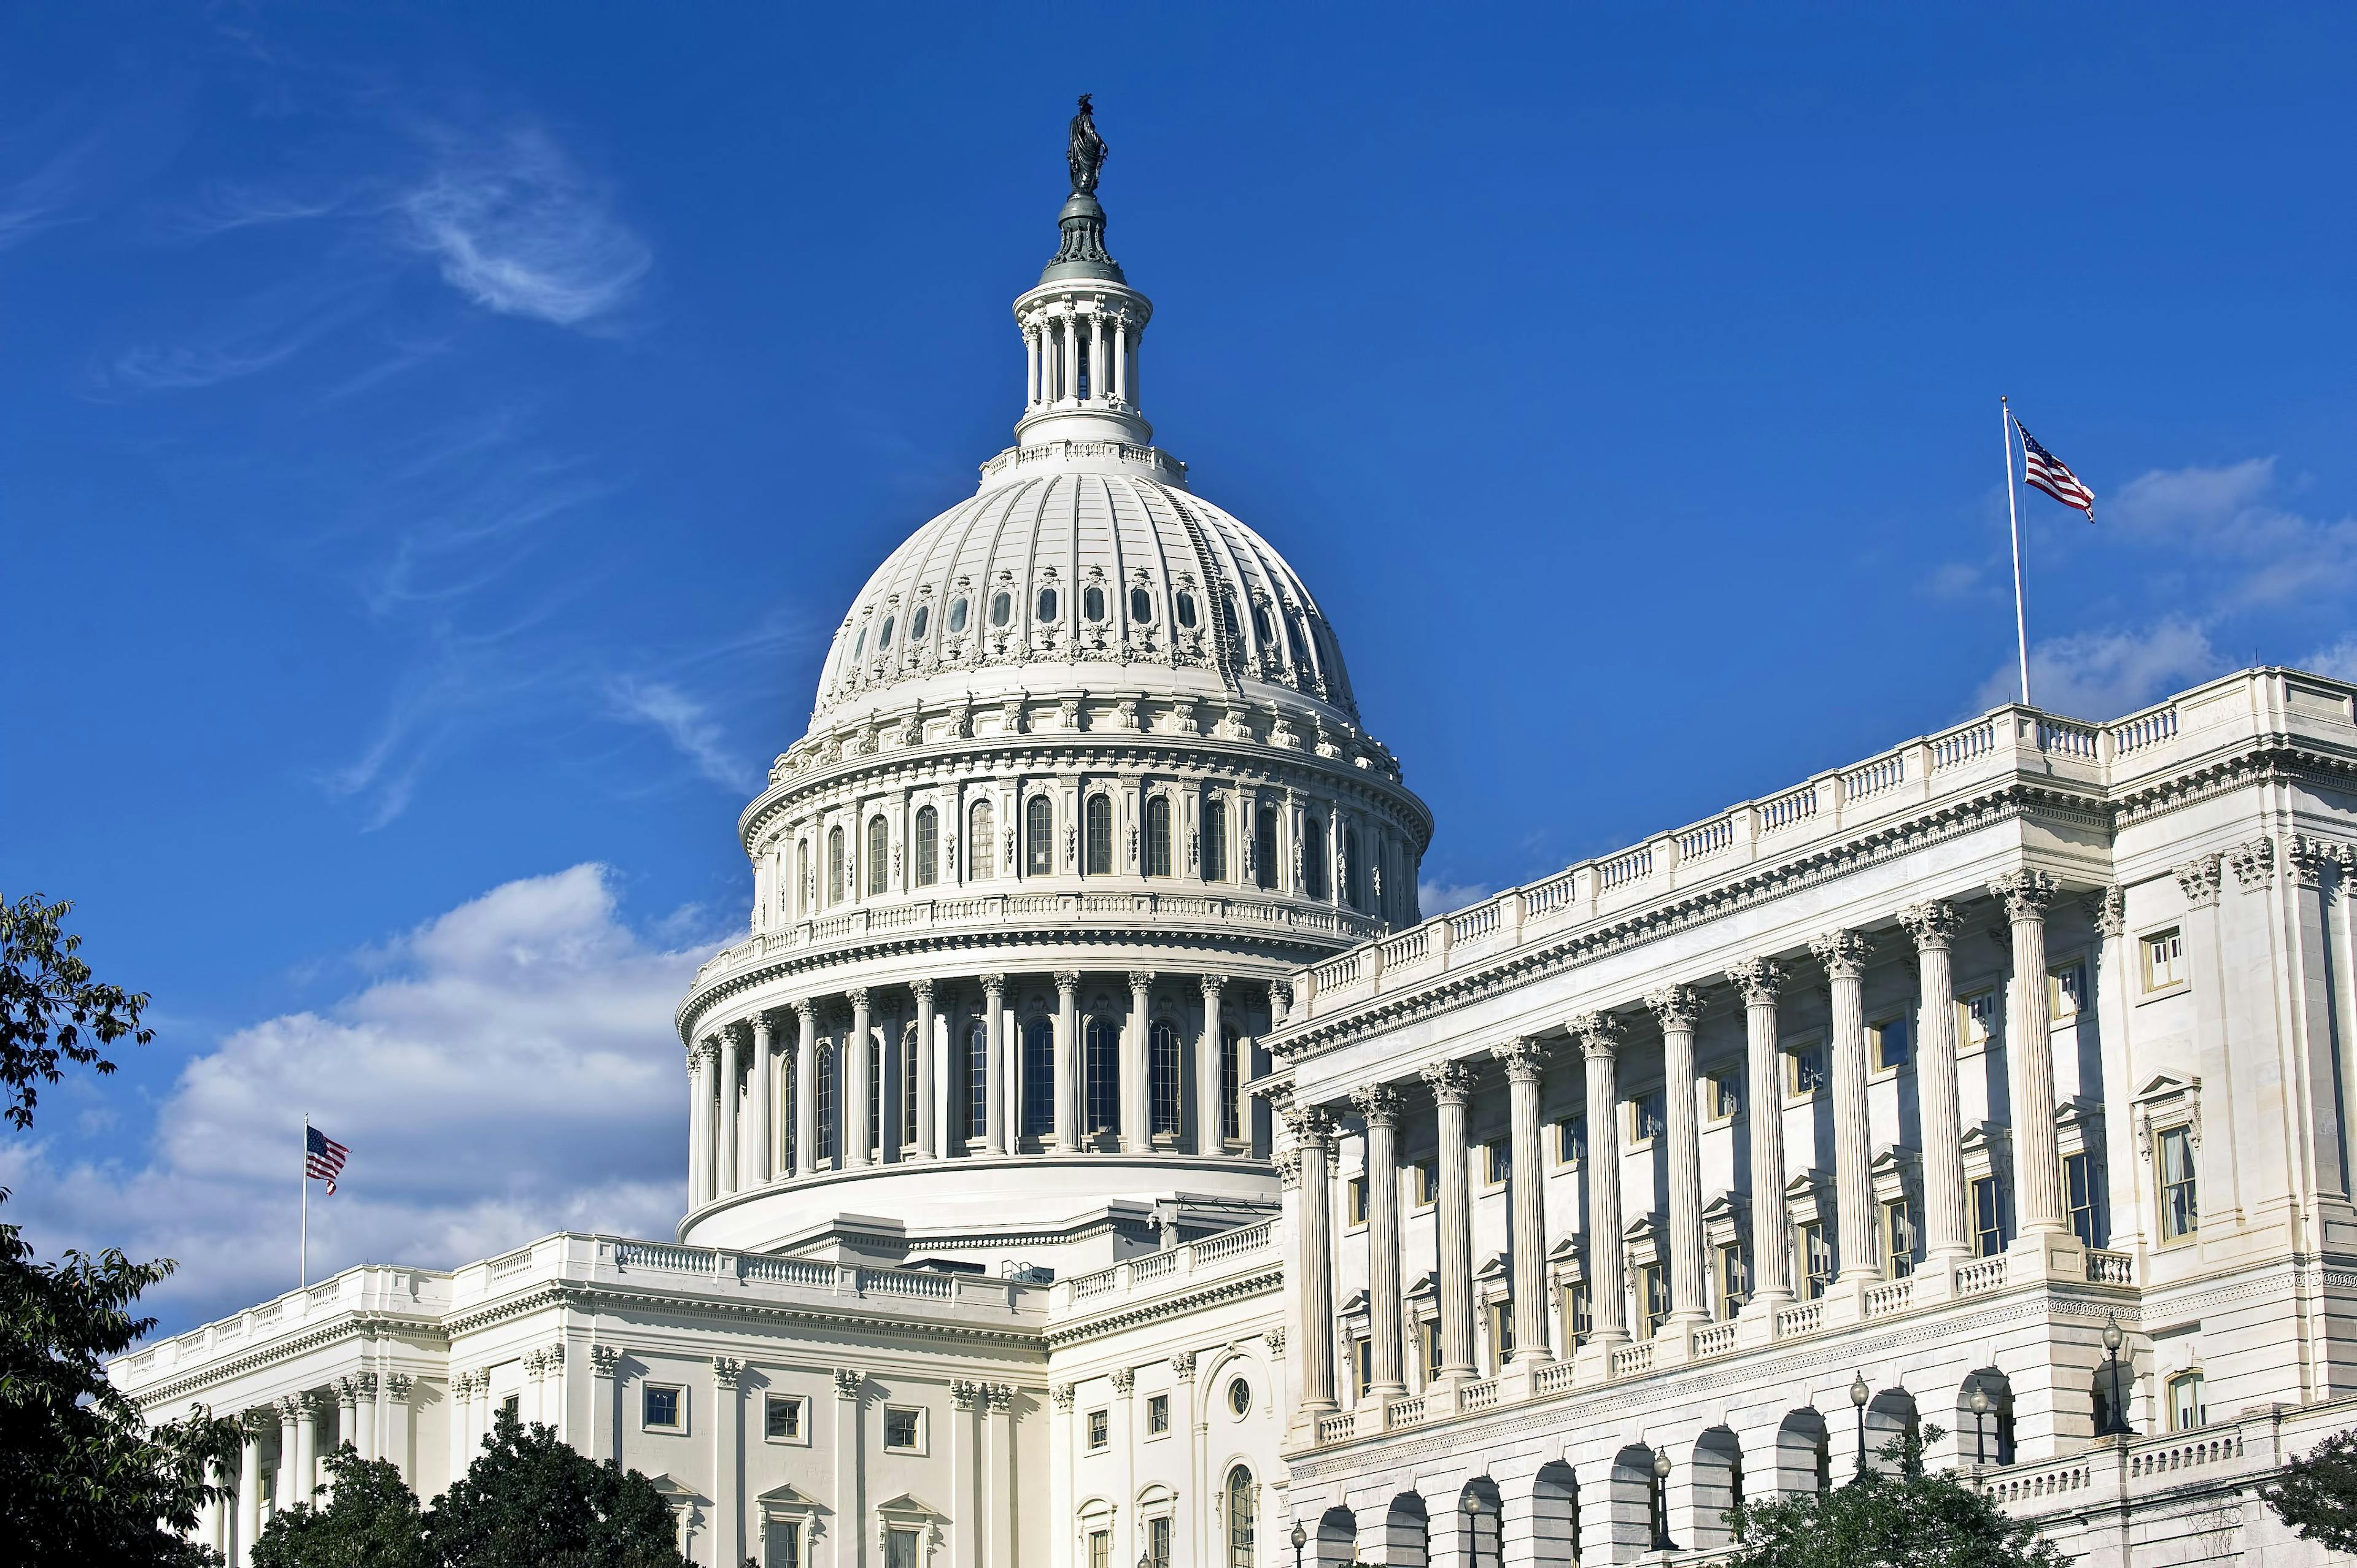 A 340B Compromise at Last? Draft Federal Legislation May Provide a Clear Path Forward